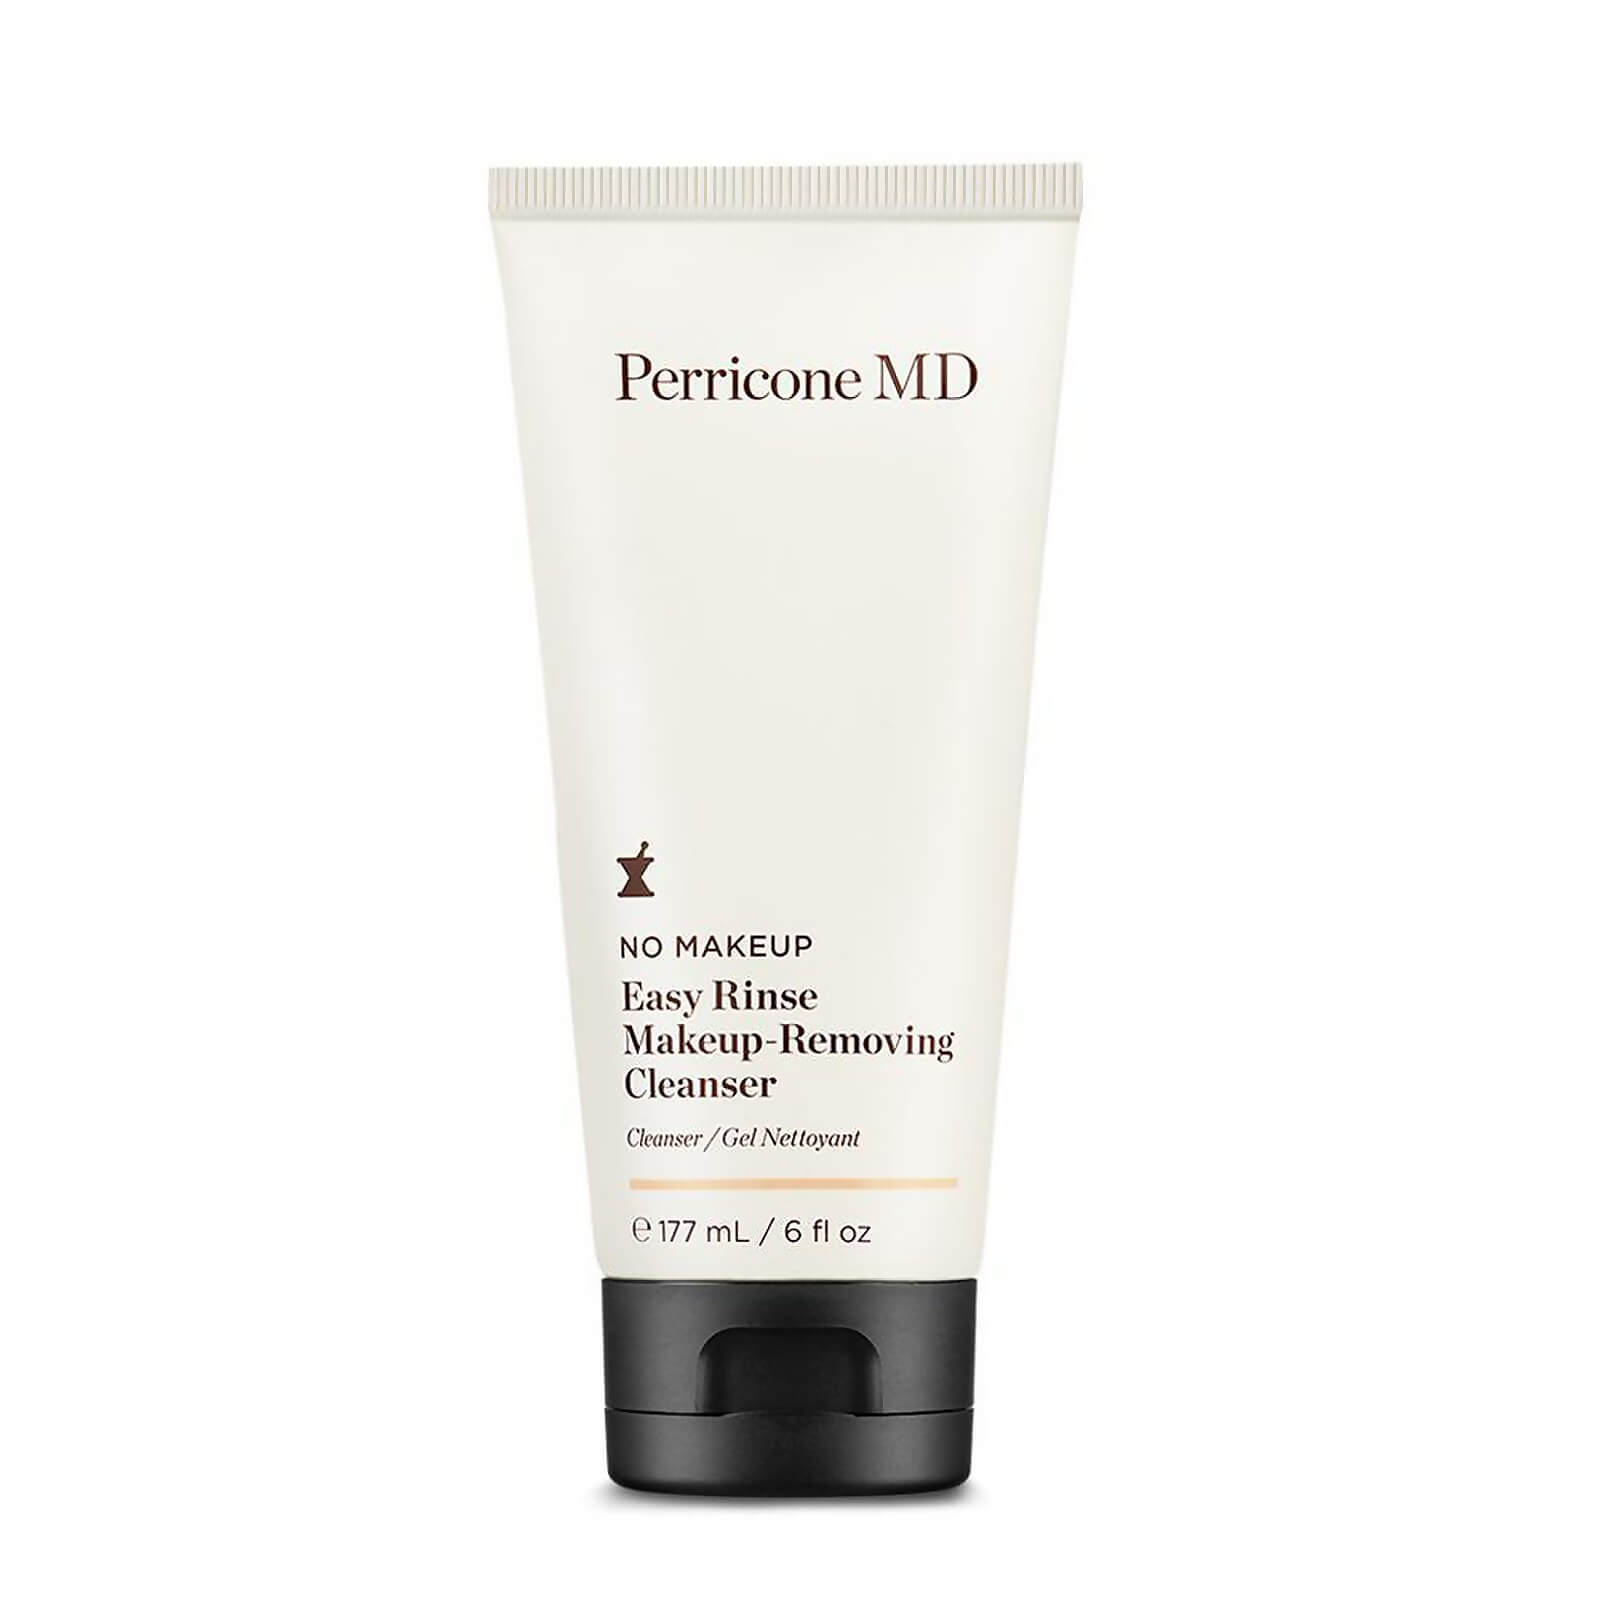 Image of Perricone MD No Makeup Easy Rinse Makeup-Removing Cleanser 117ml